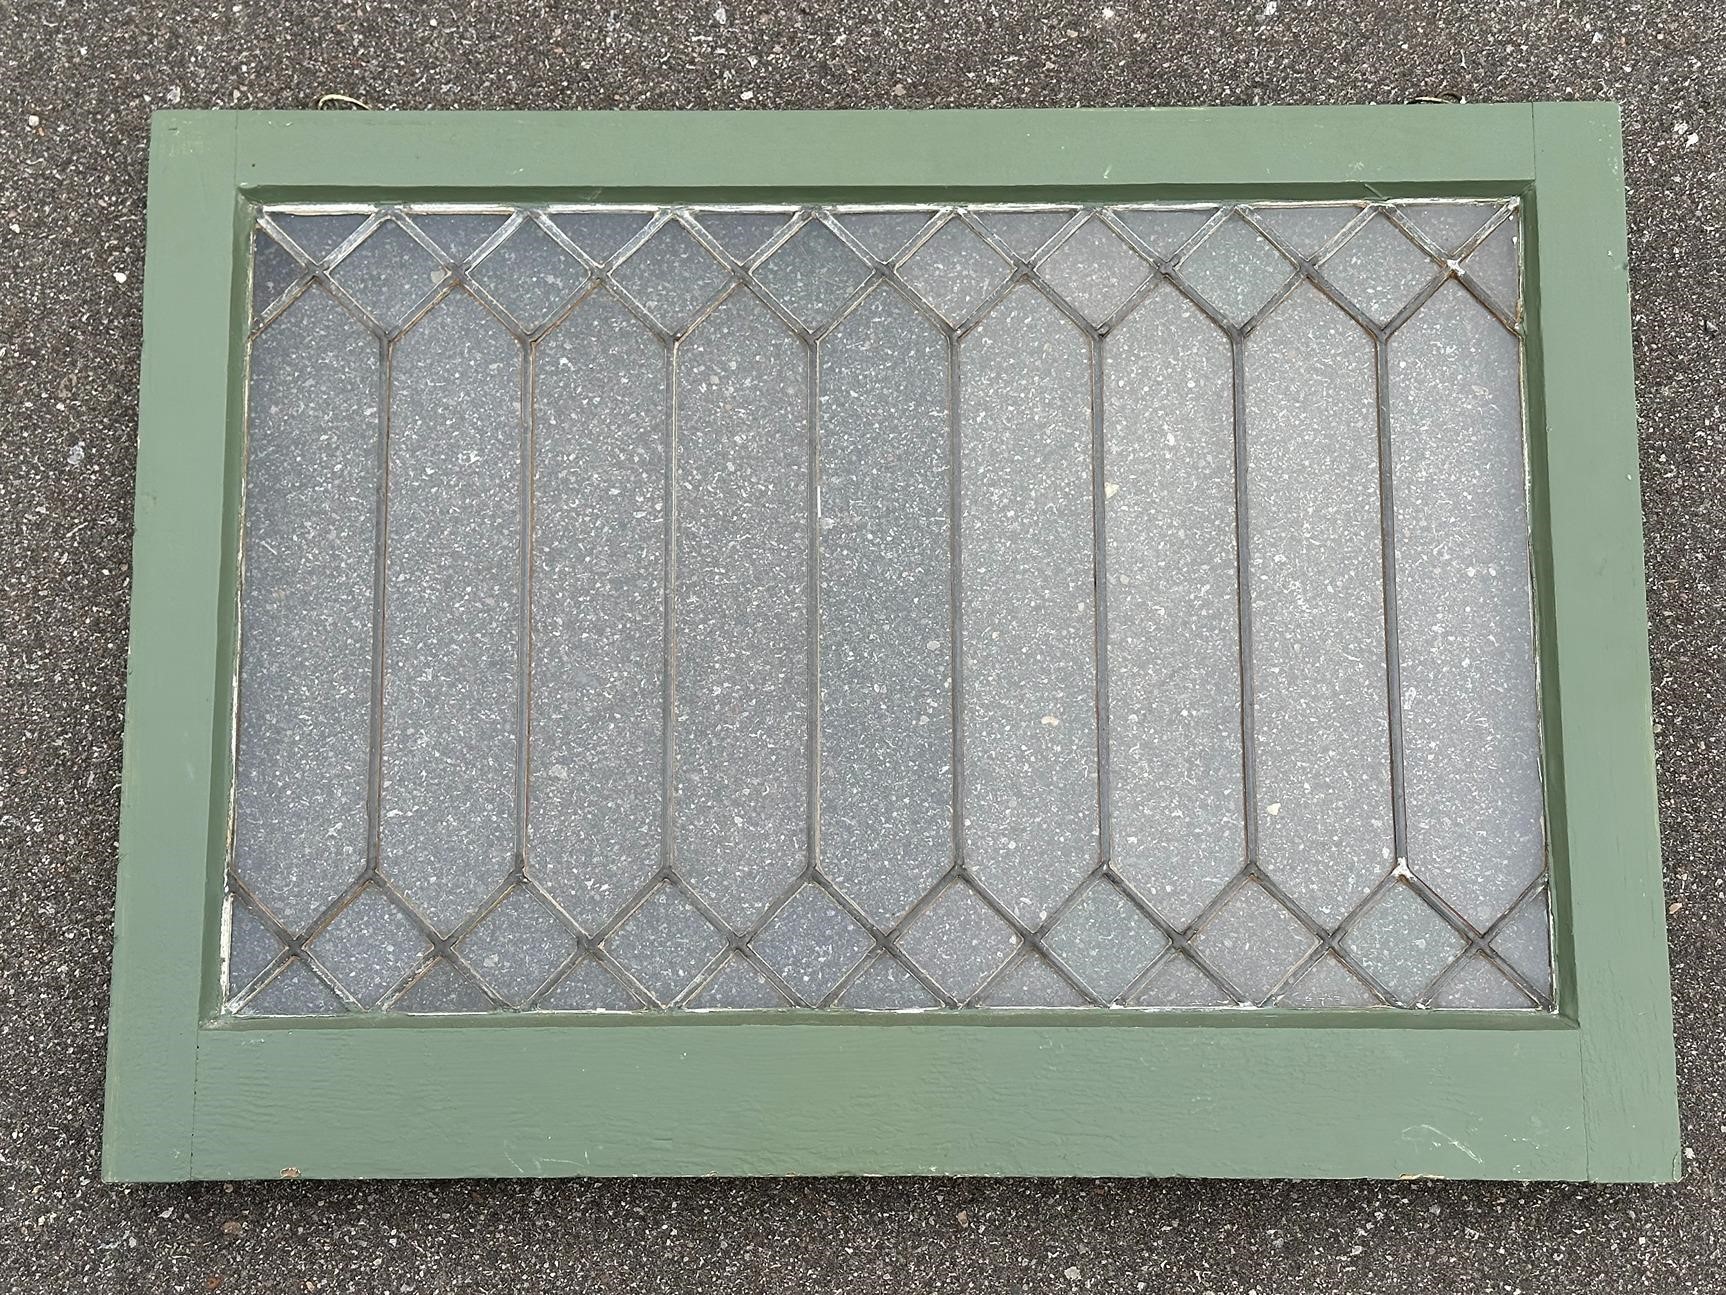 Antique Chicago Bungalow Leaded Glass Window